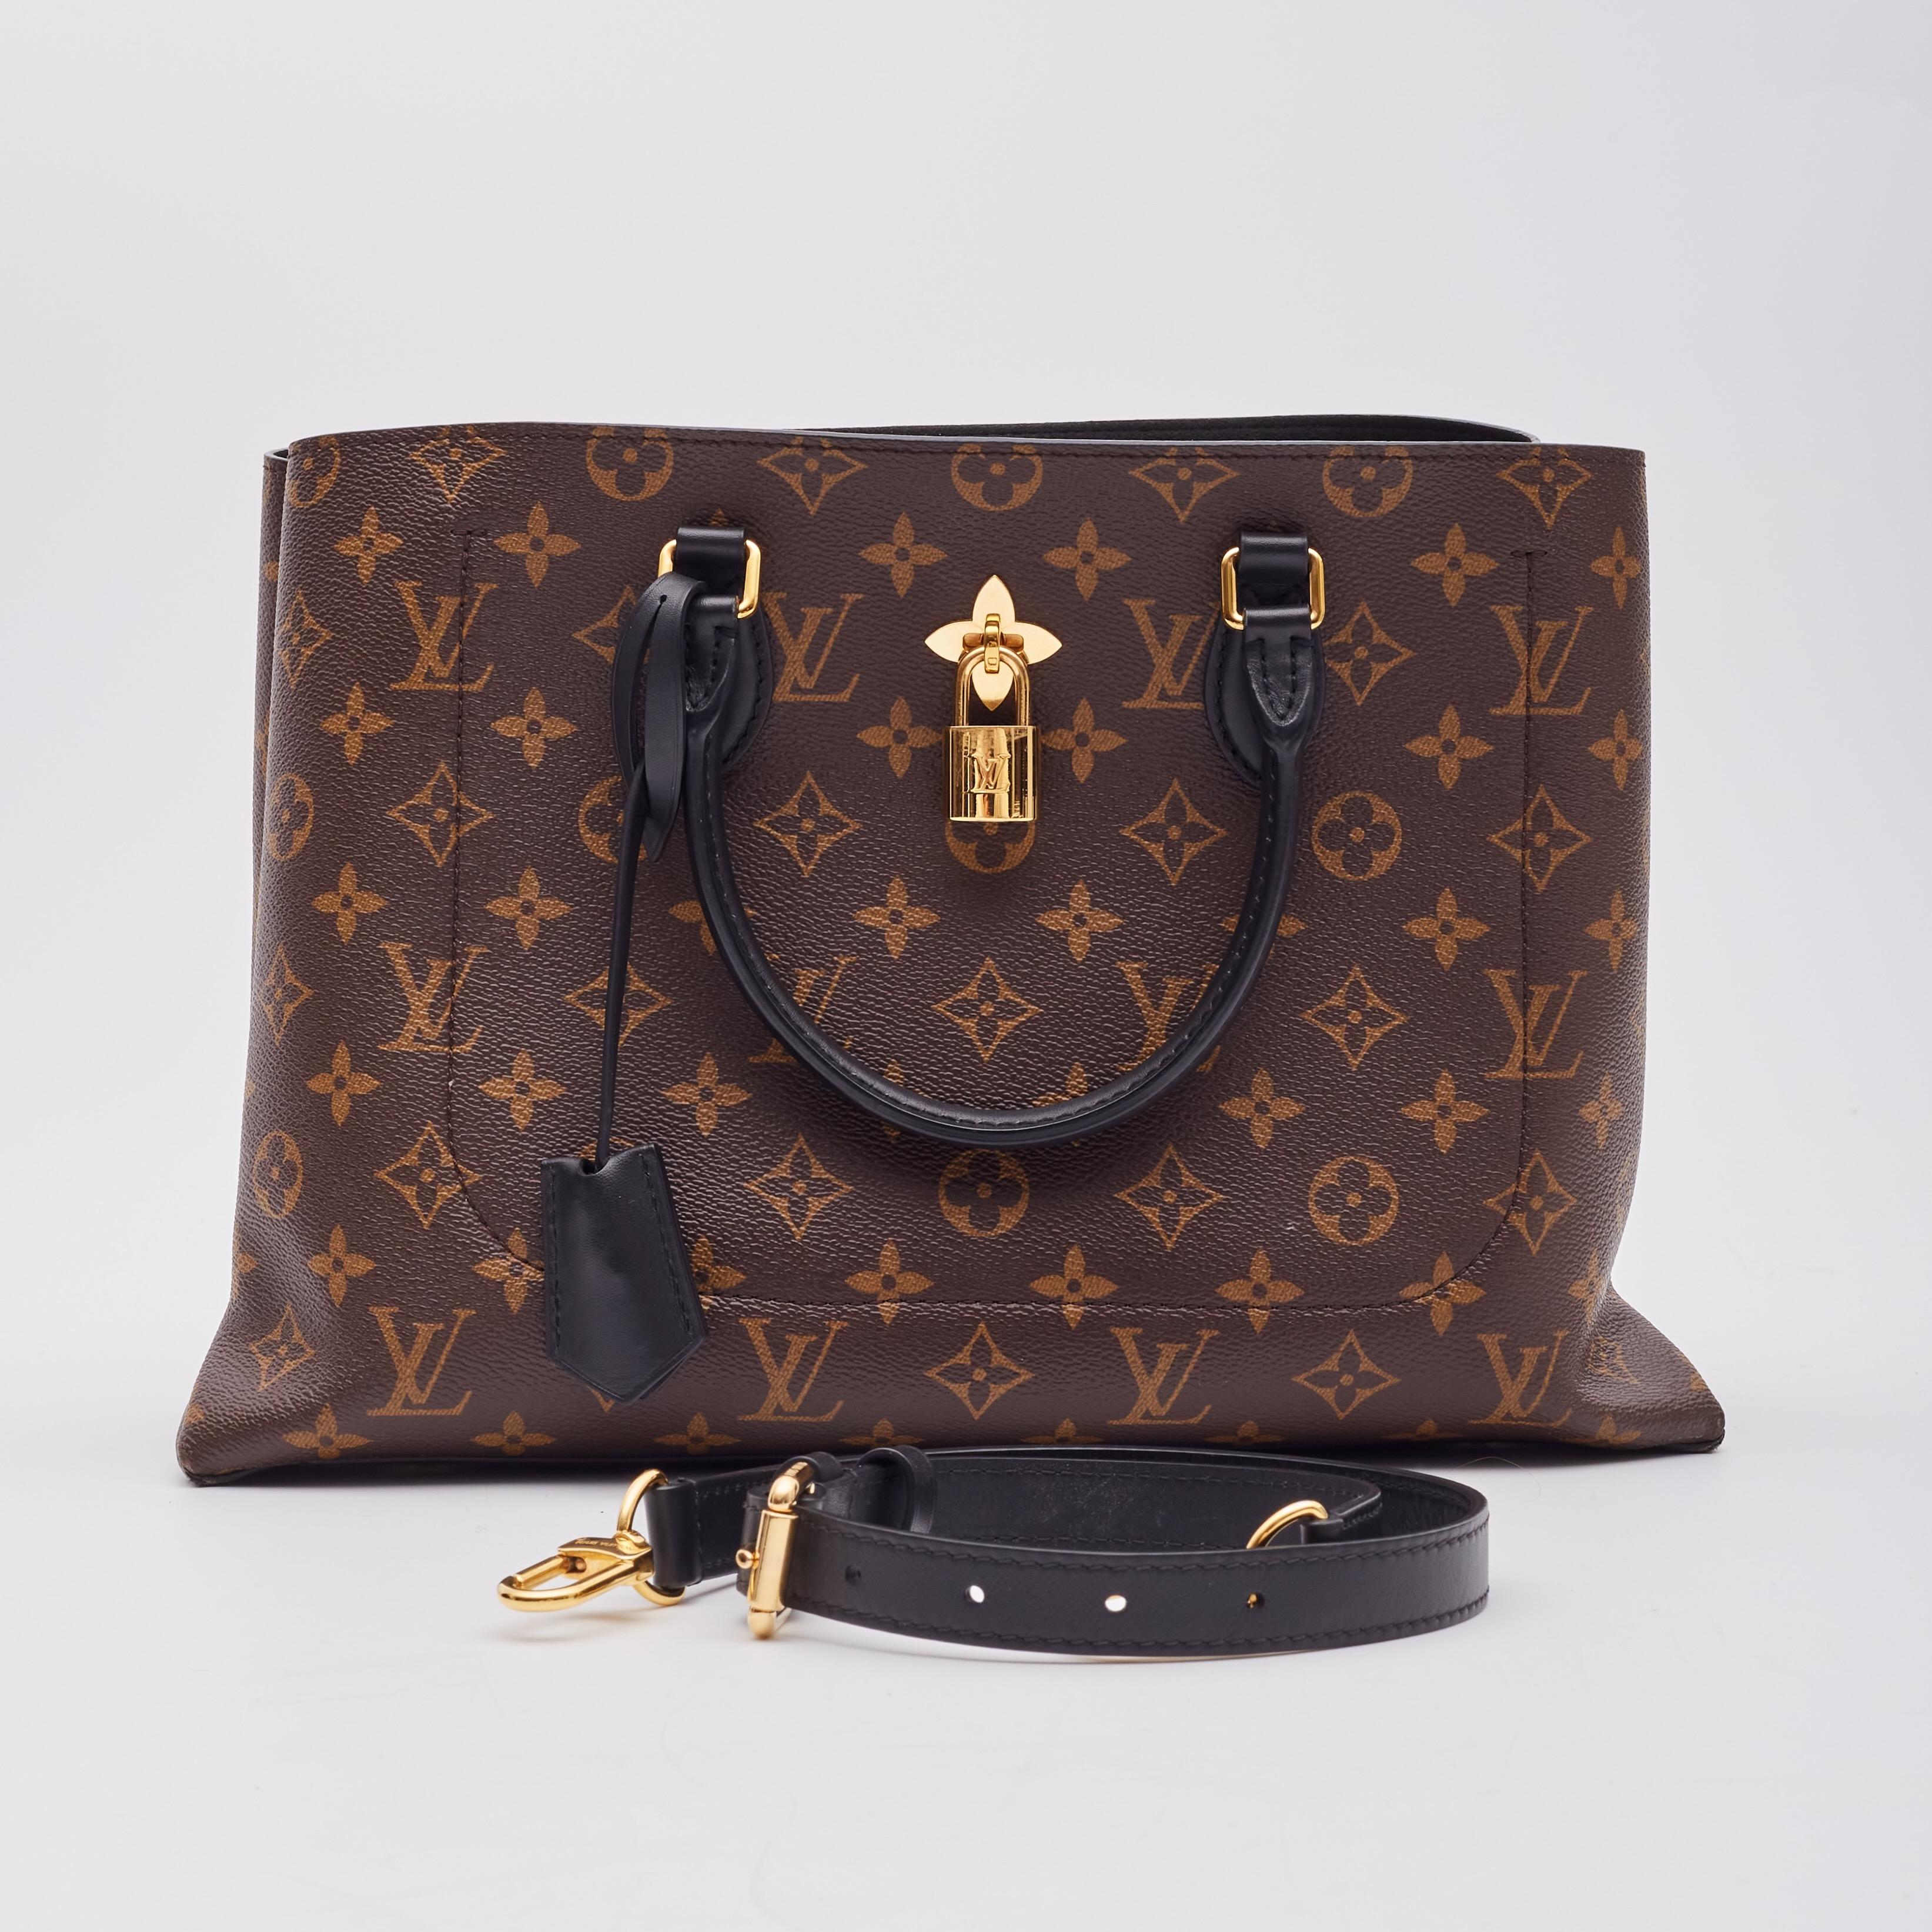 Louis Vuitton Monogram Flower Tote Black Leather Finishes In Good Condition For Sale In Montreal, Quebec